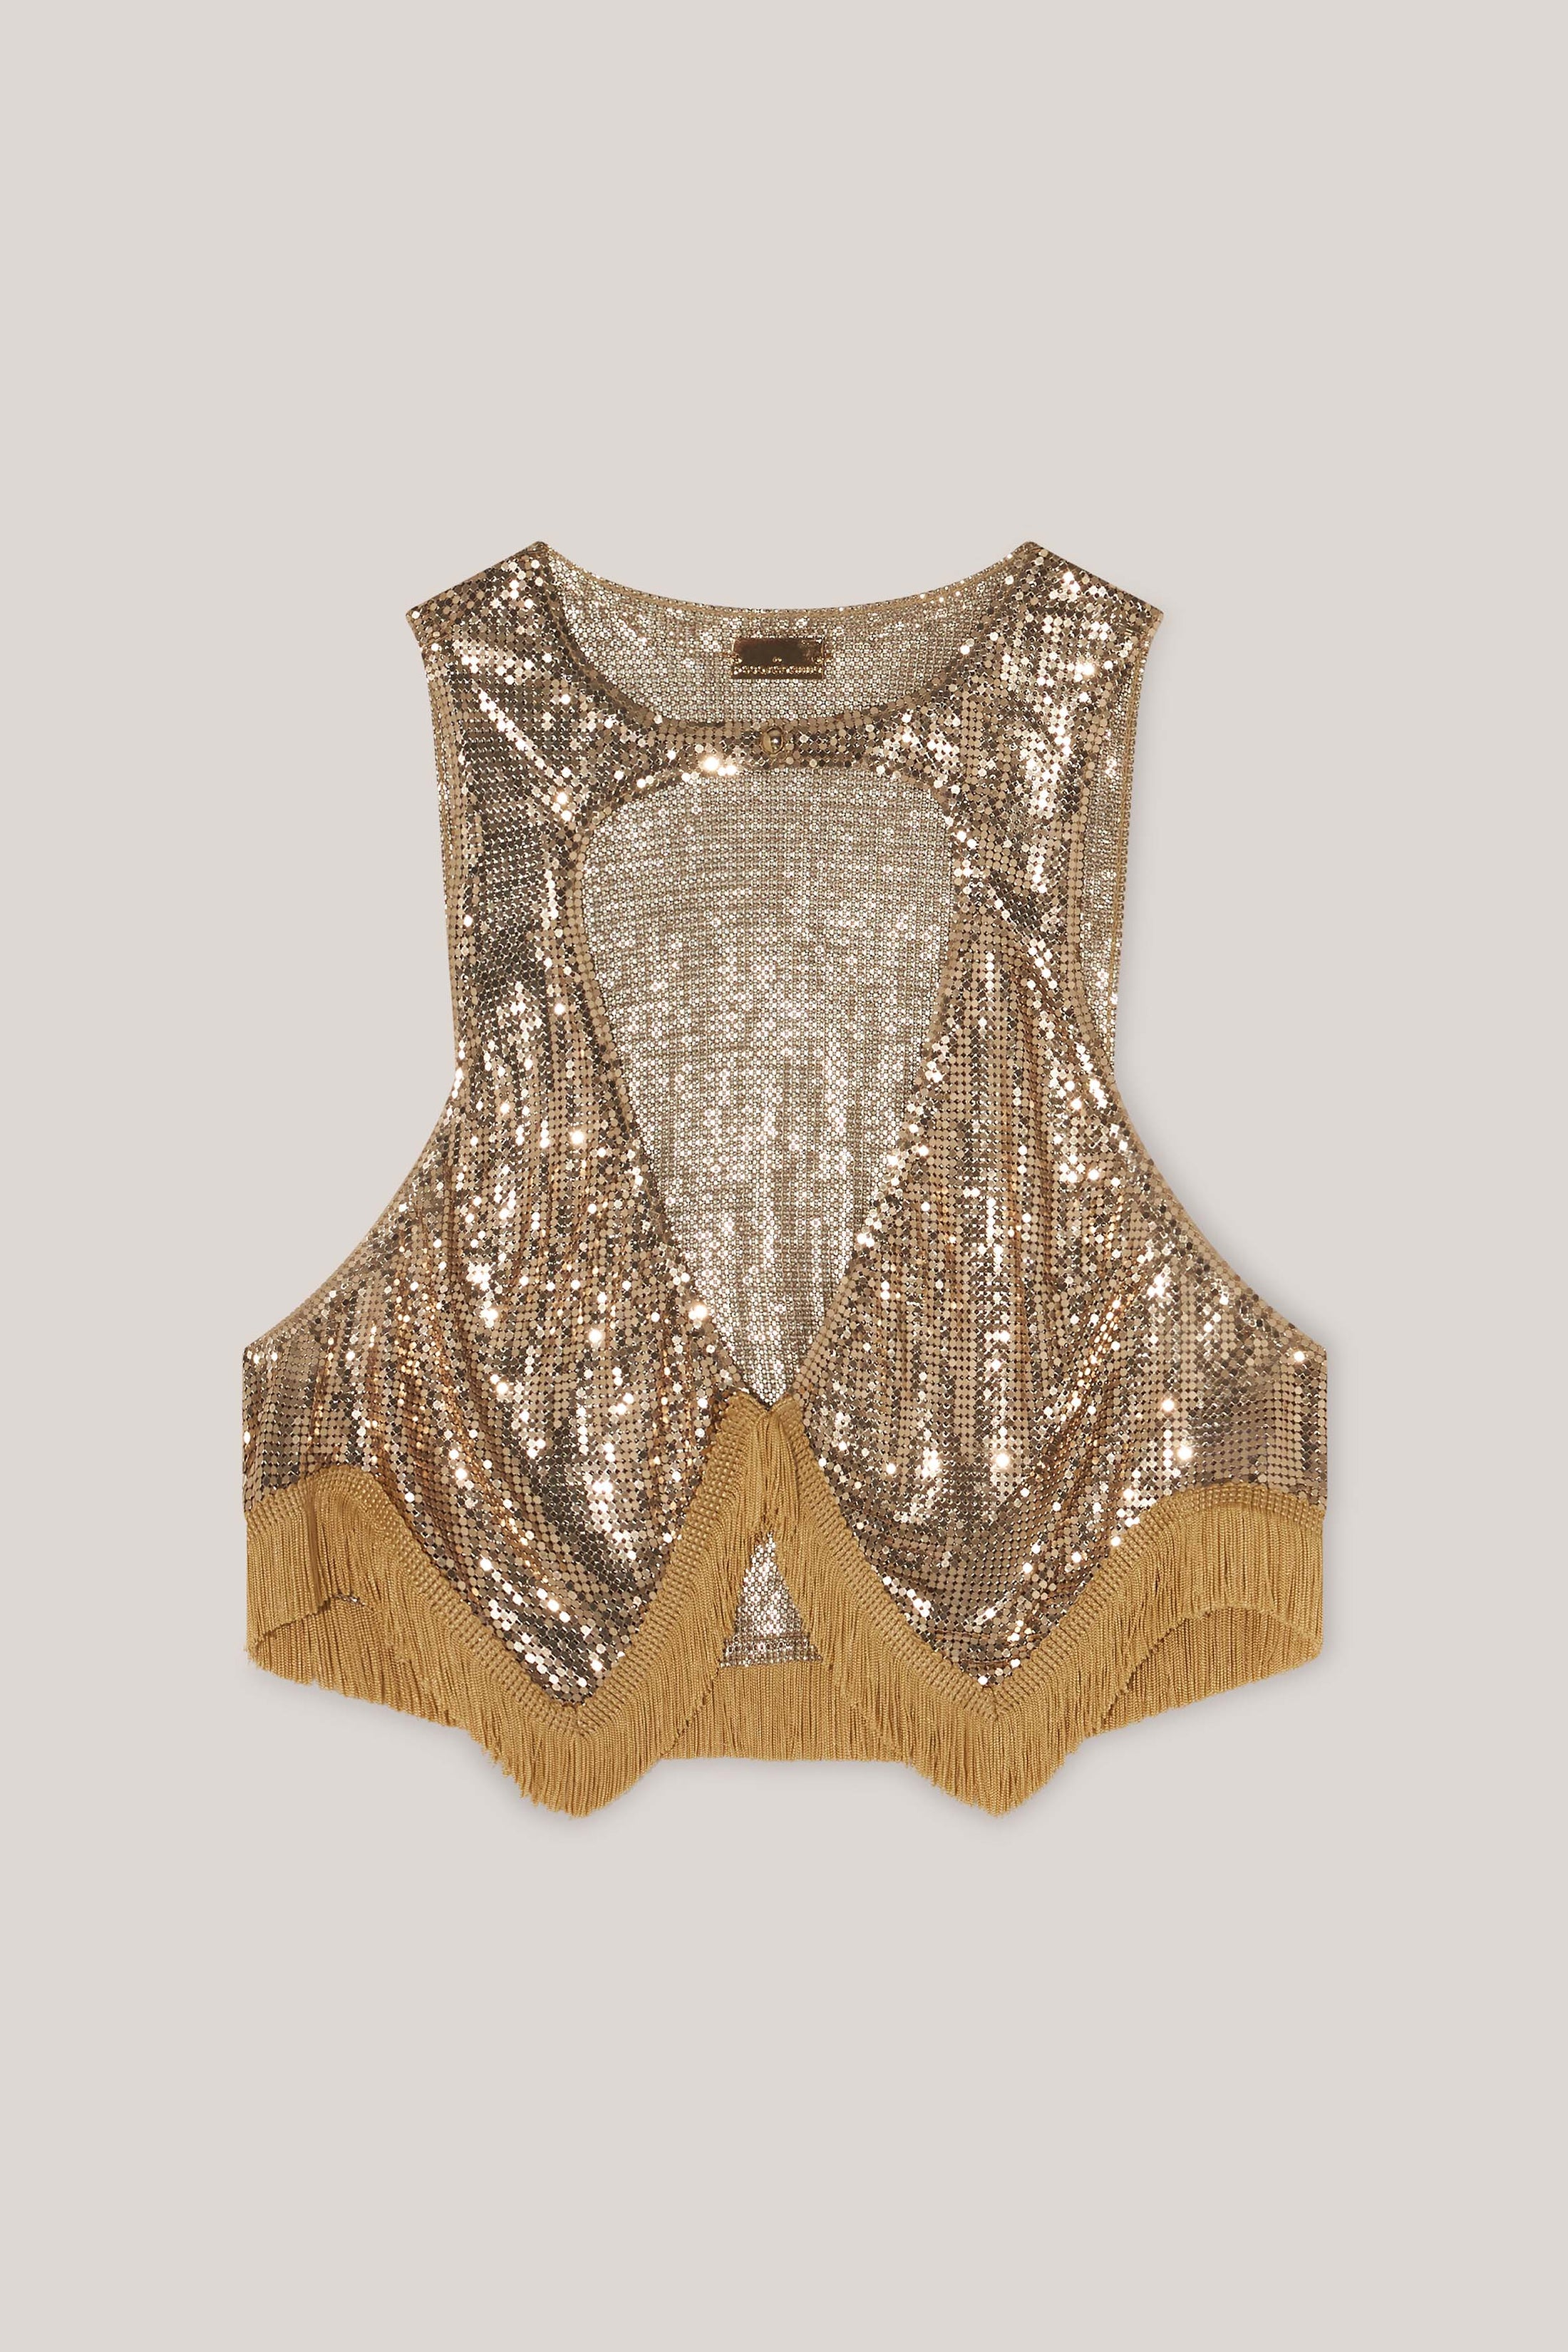 Fringed Metallic Cut-Out Top